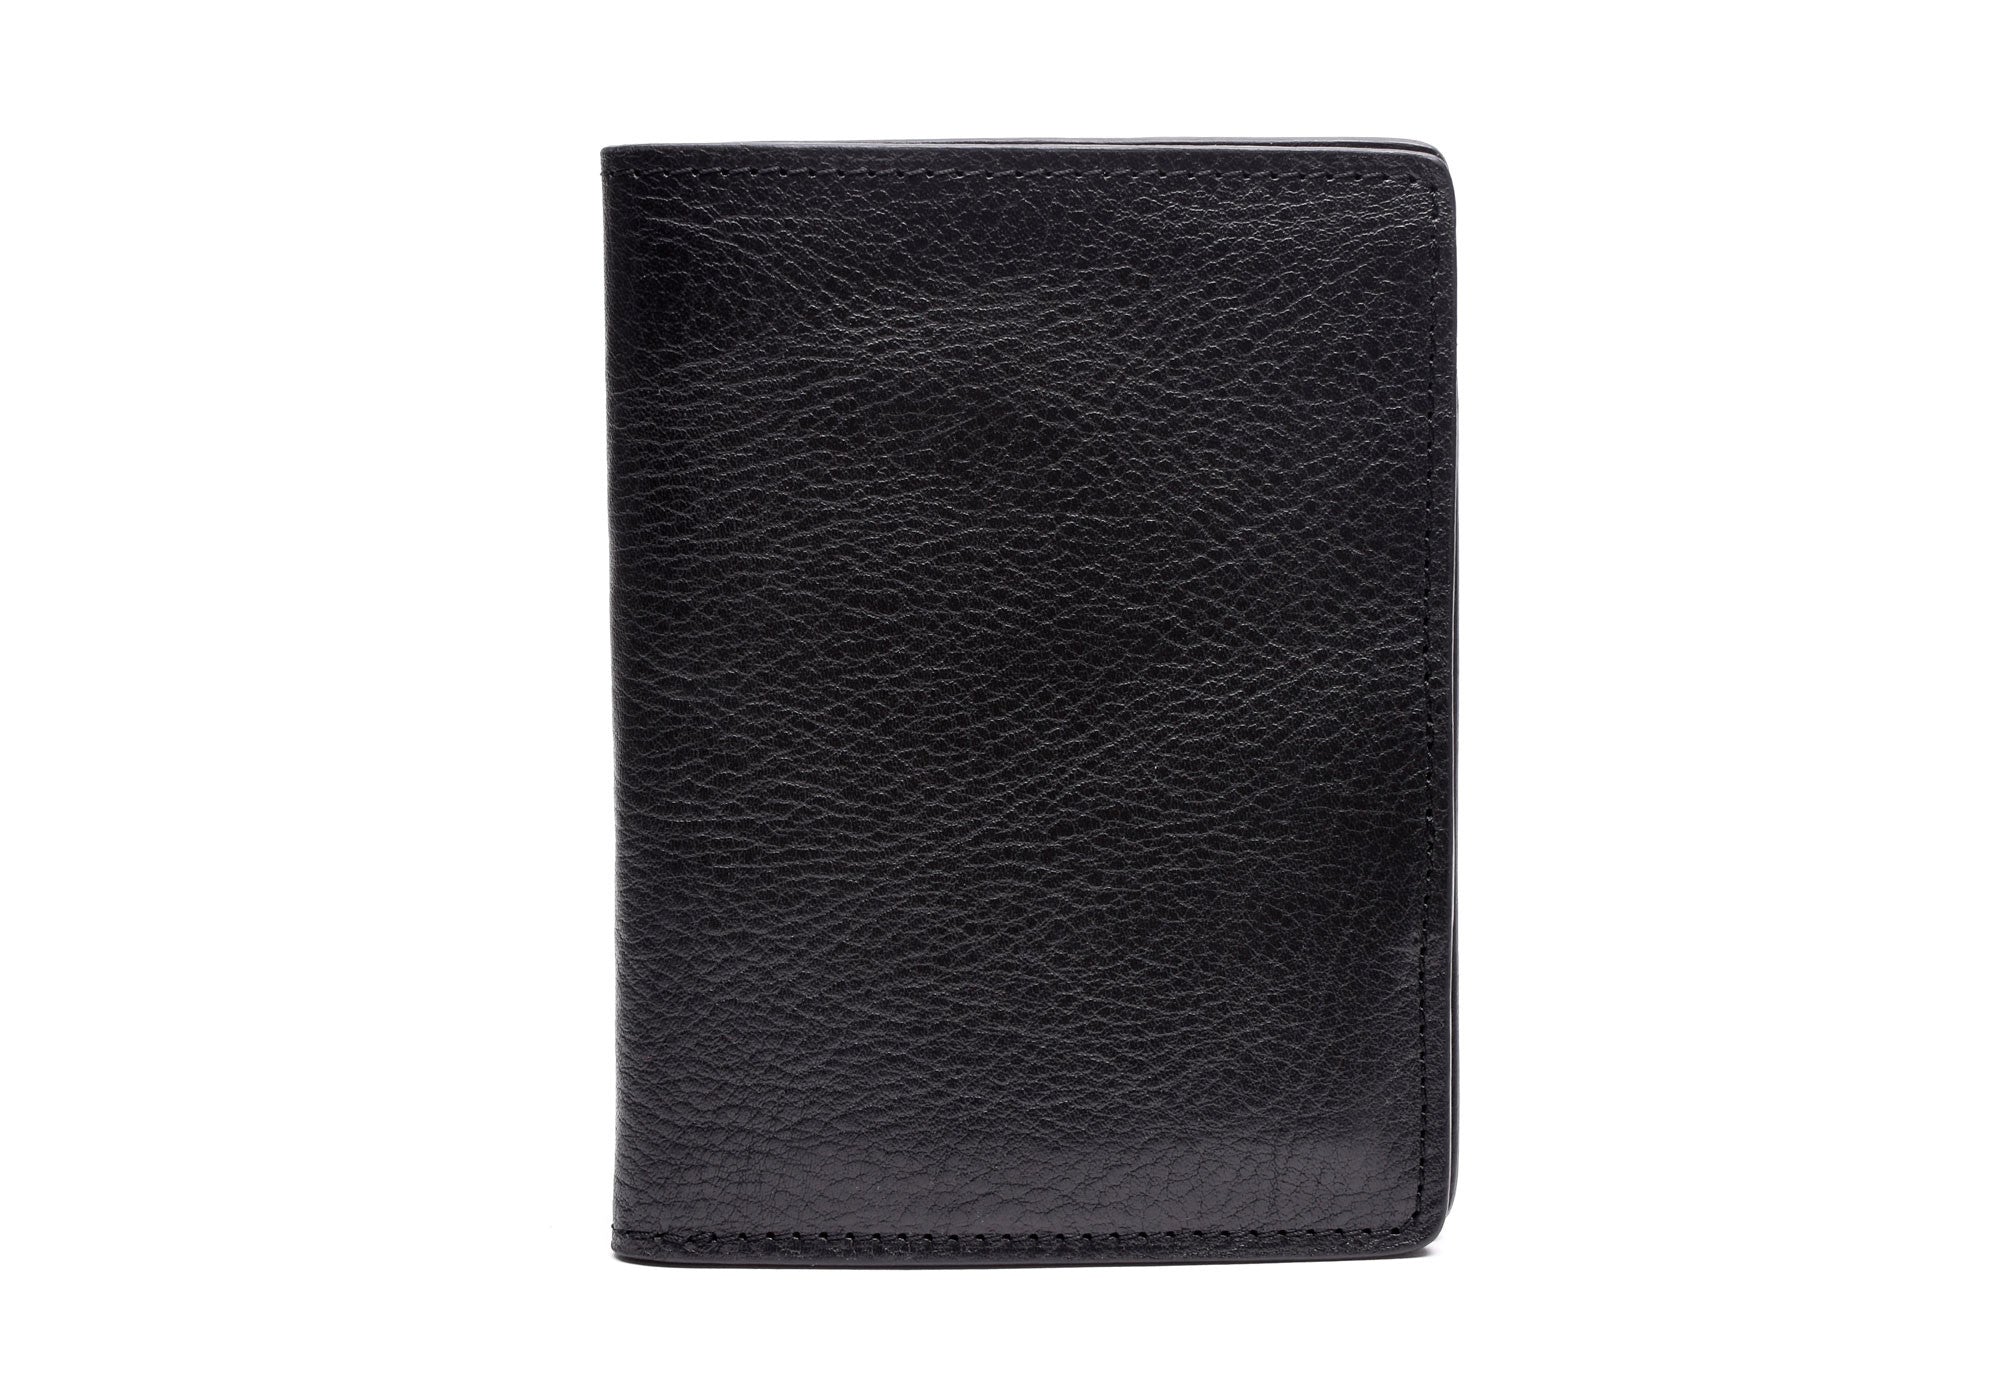 Front View of Leather Passport Wallet Black